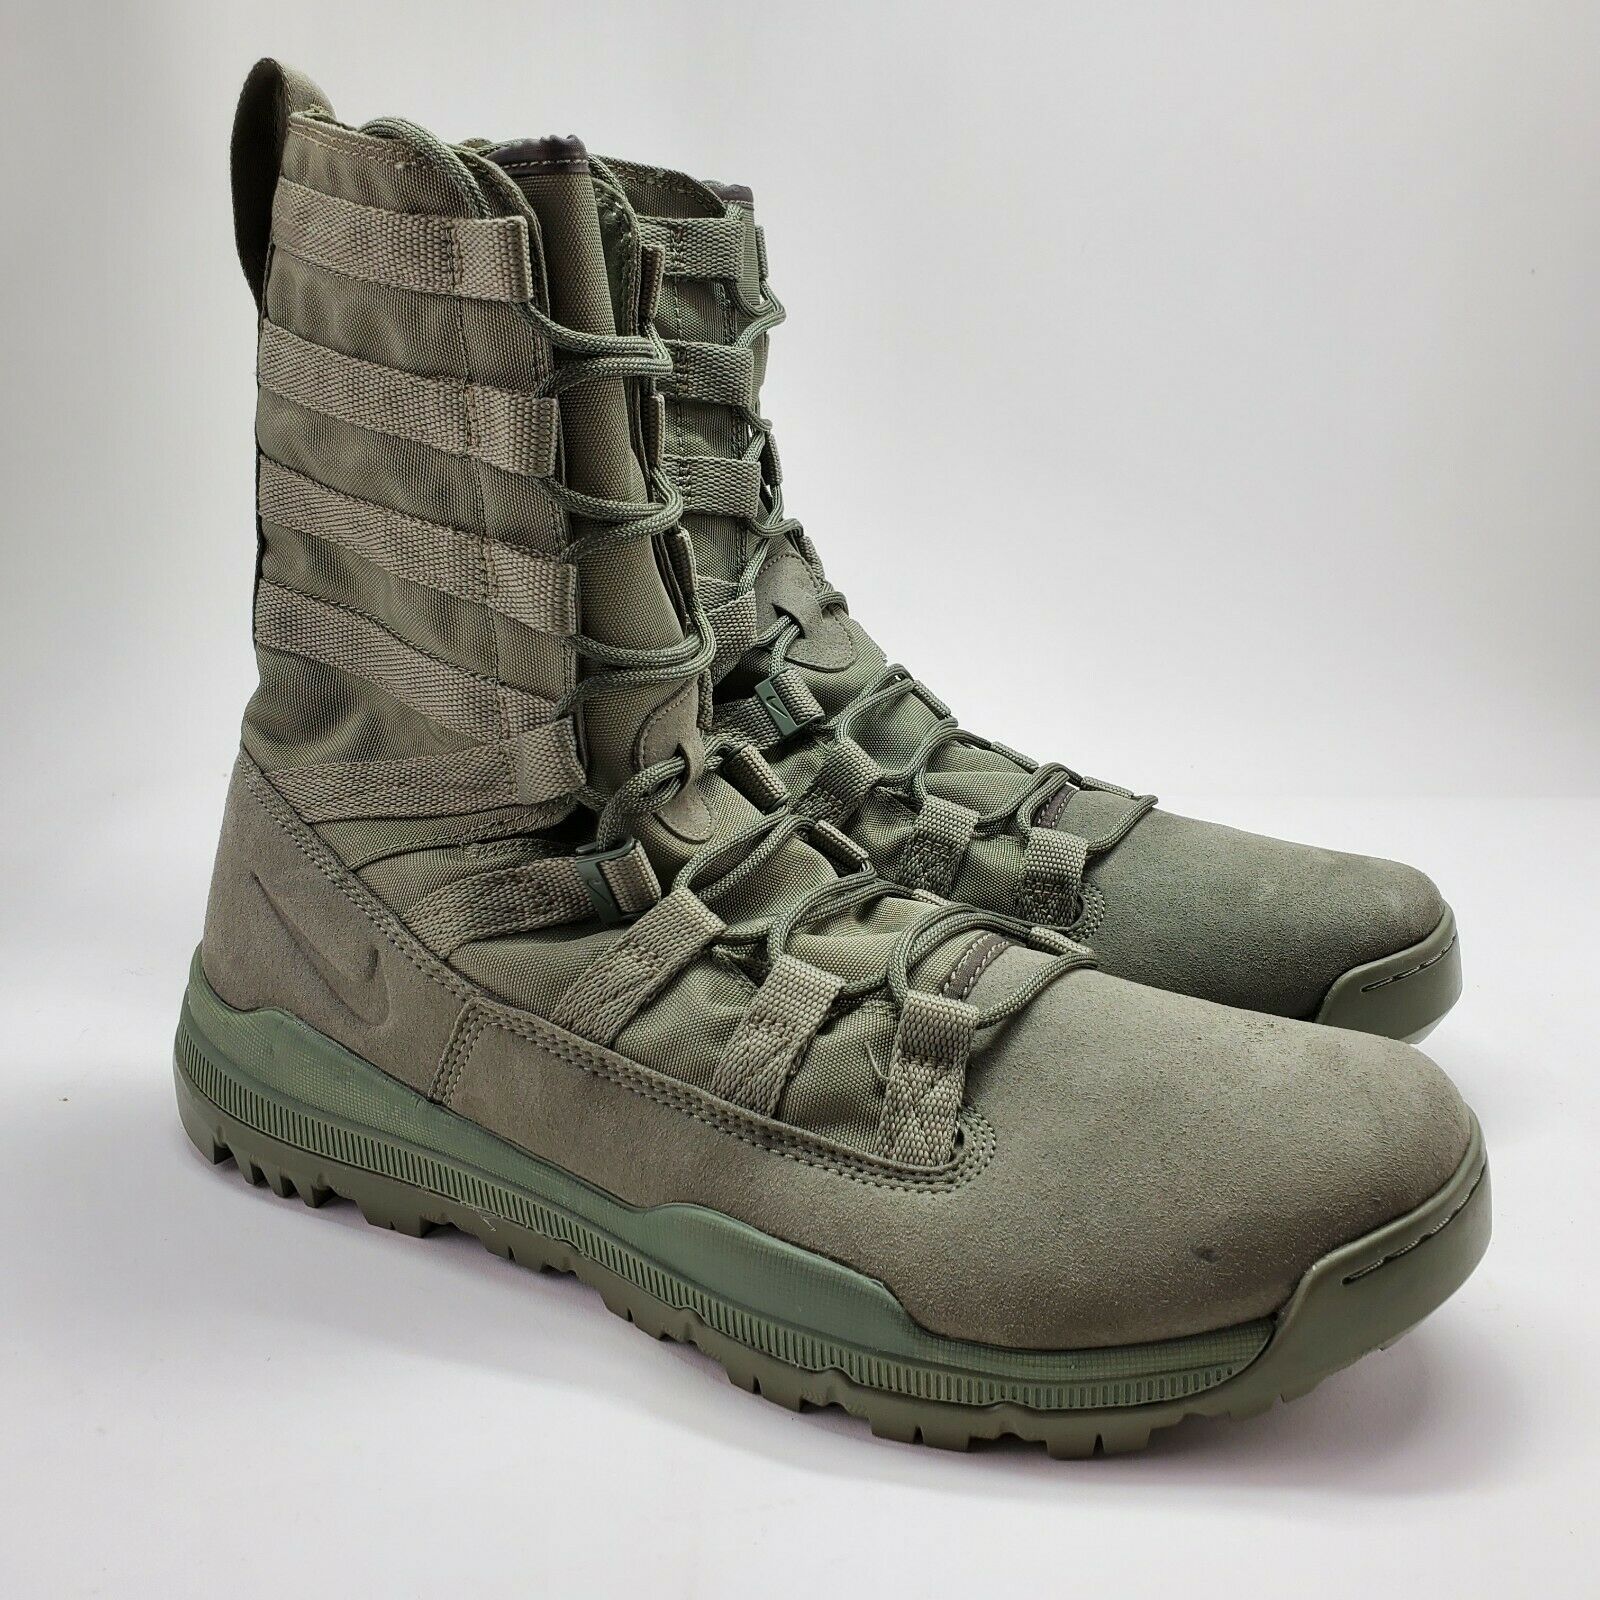 Army Green Nike Boots - Army Military